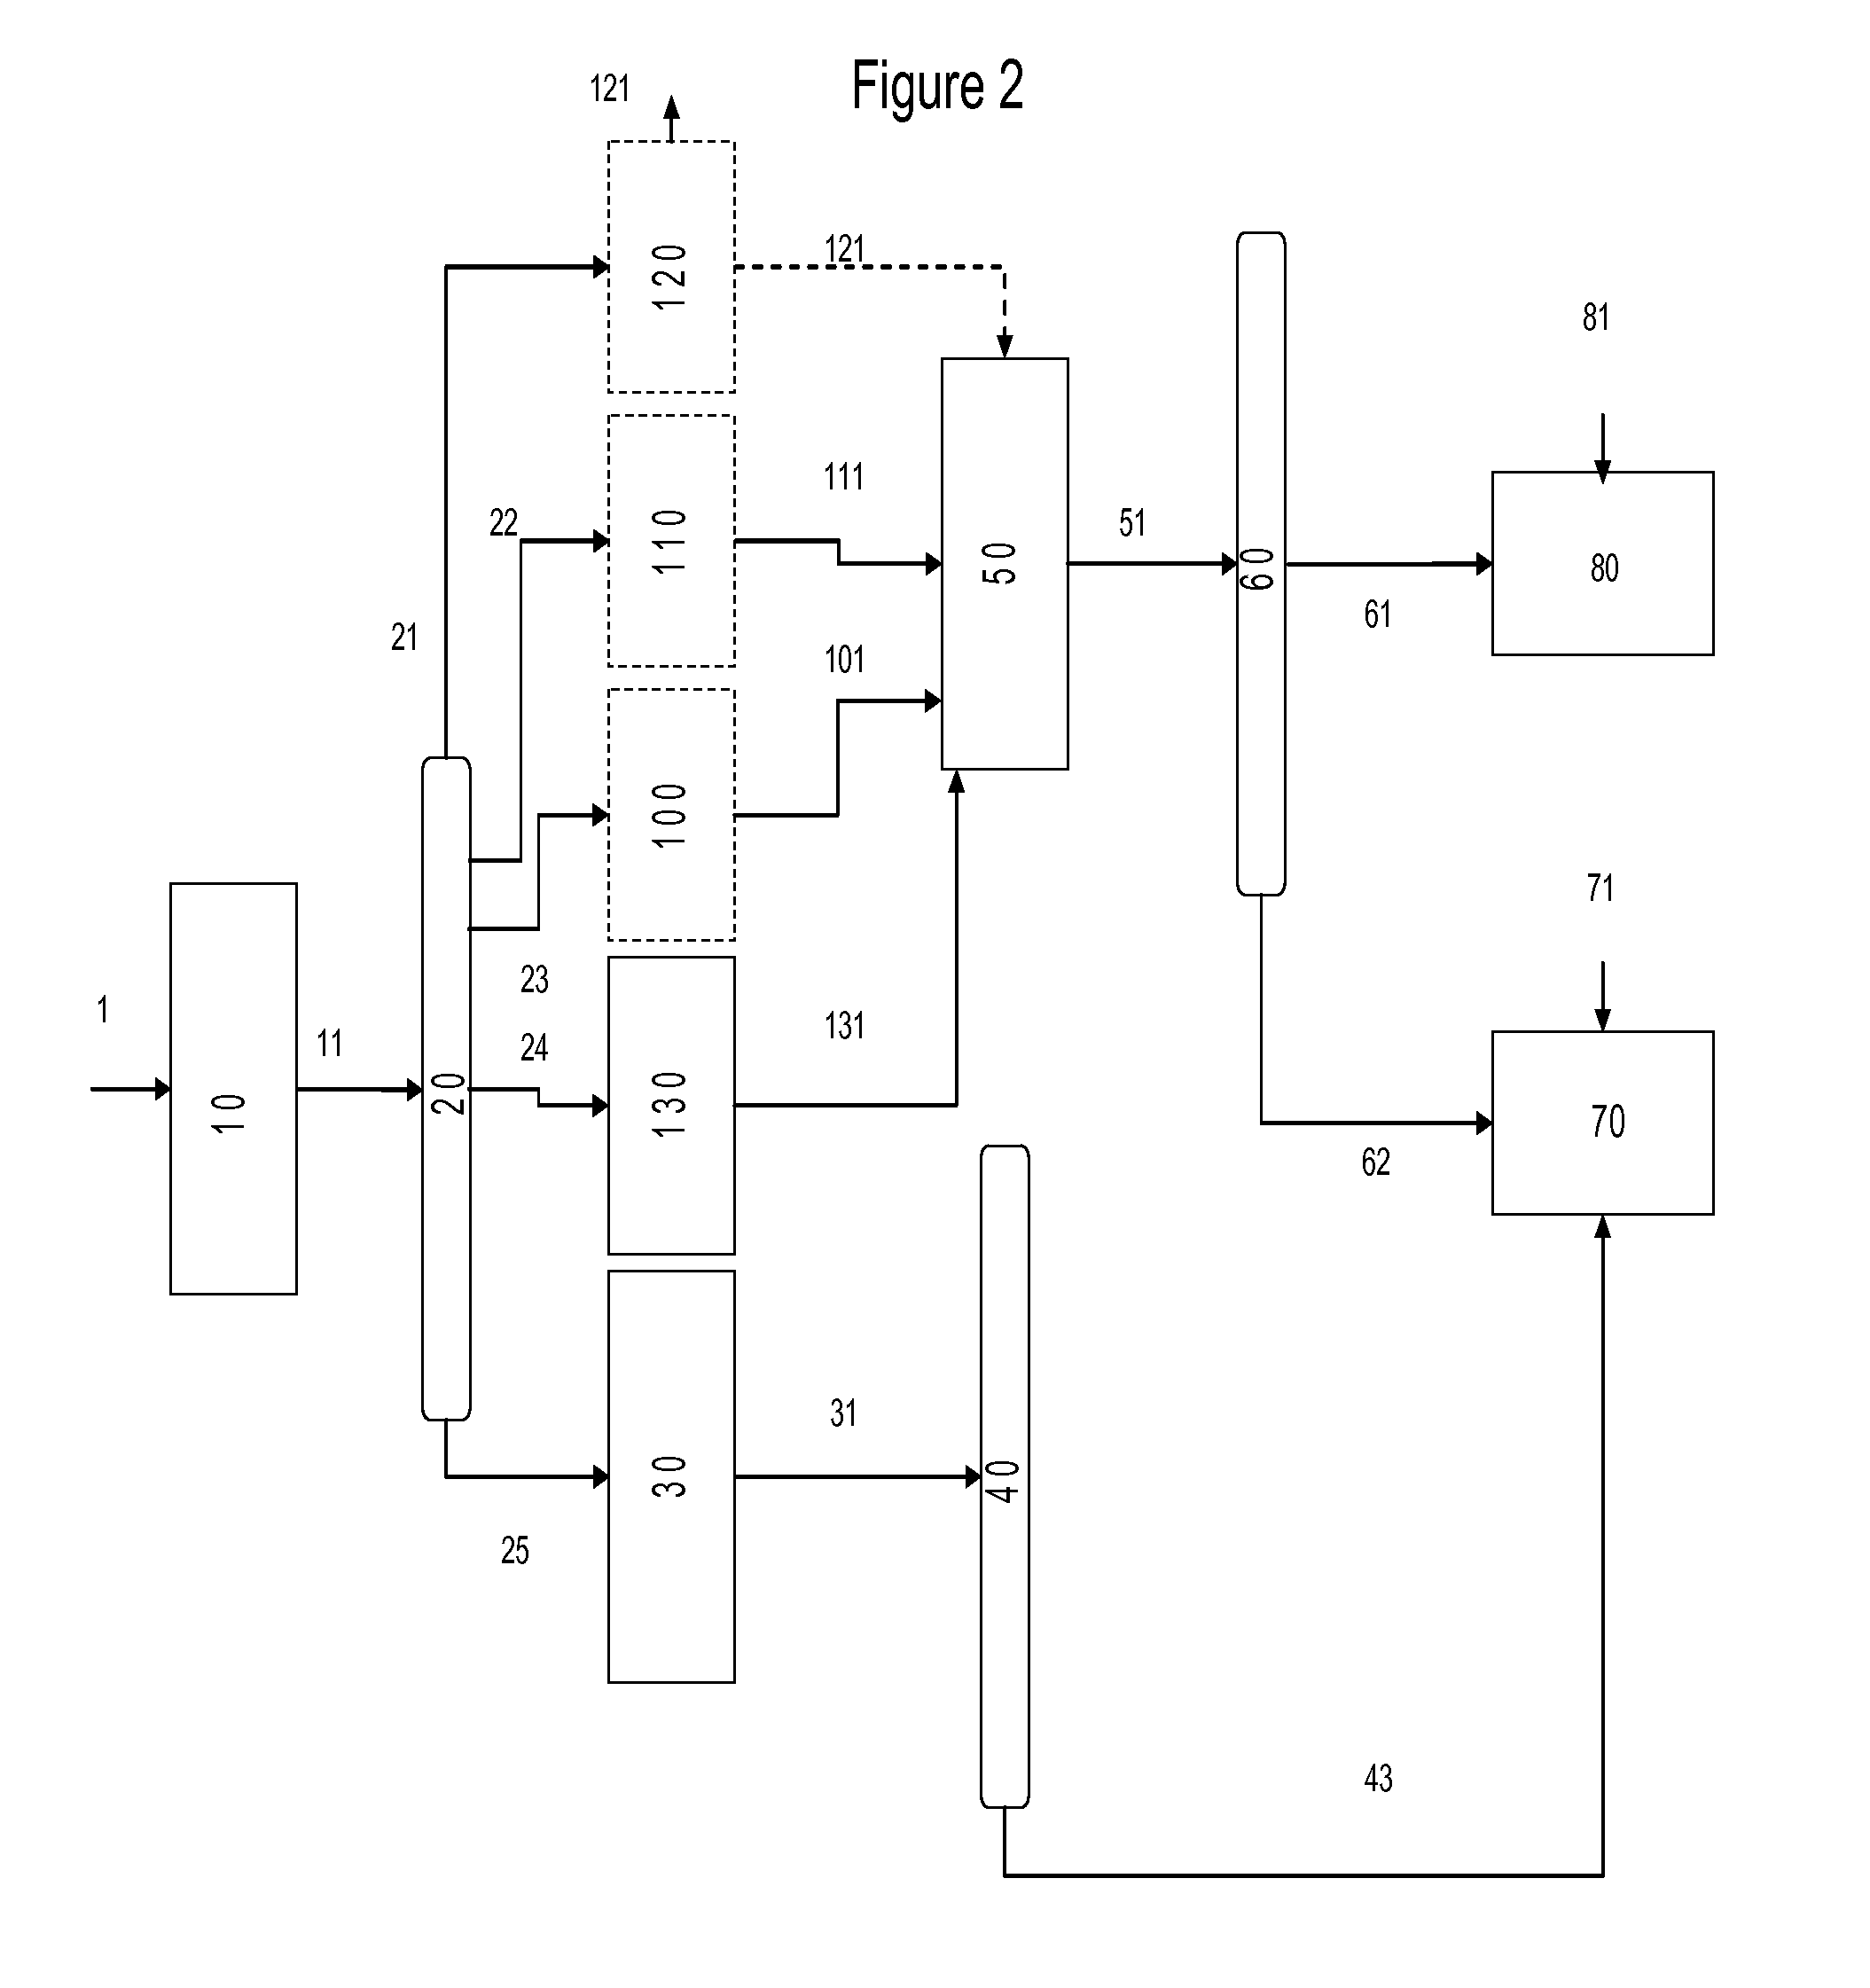 Production of distillate blending components